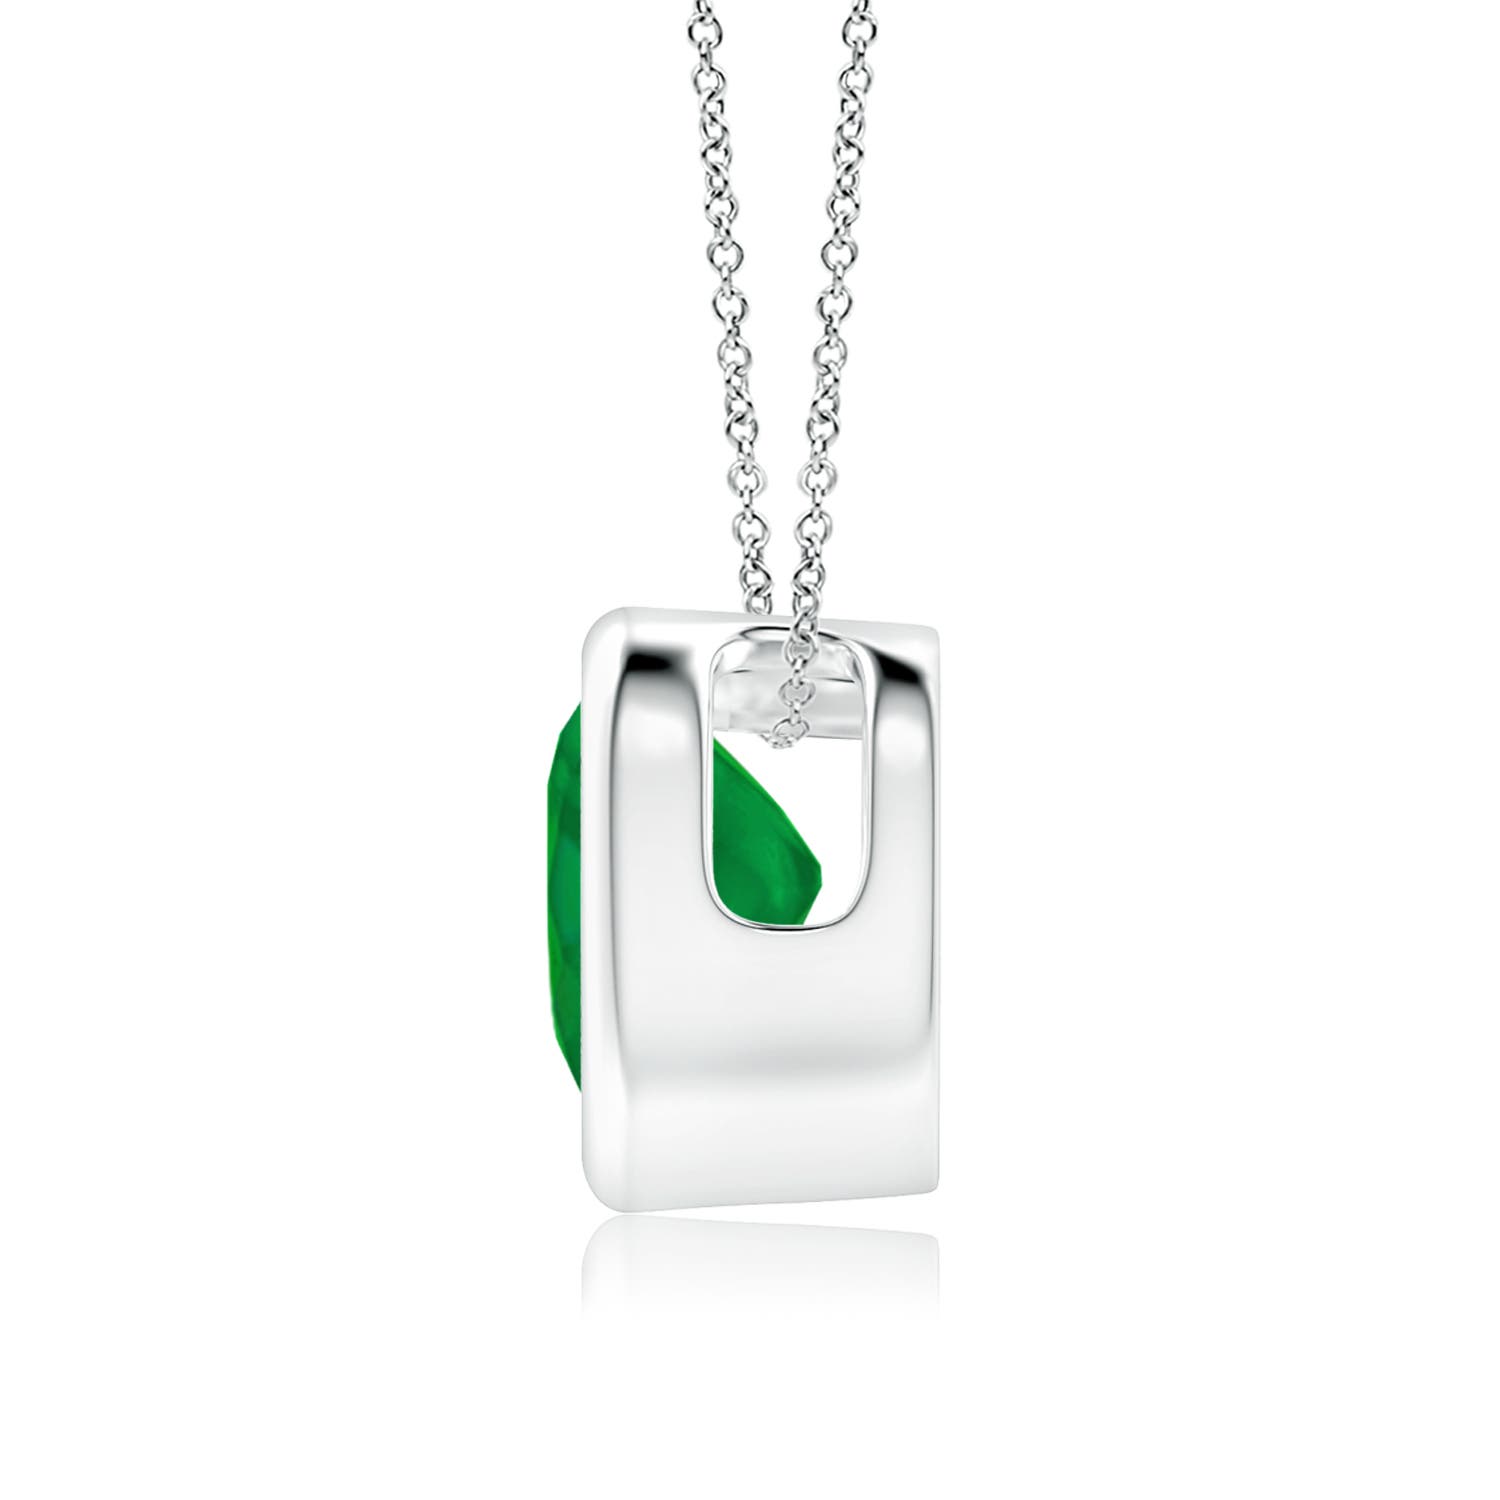 AA - Emerald / 0.6 CT / 14 KT White Gold